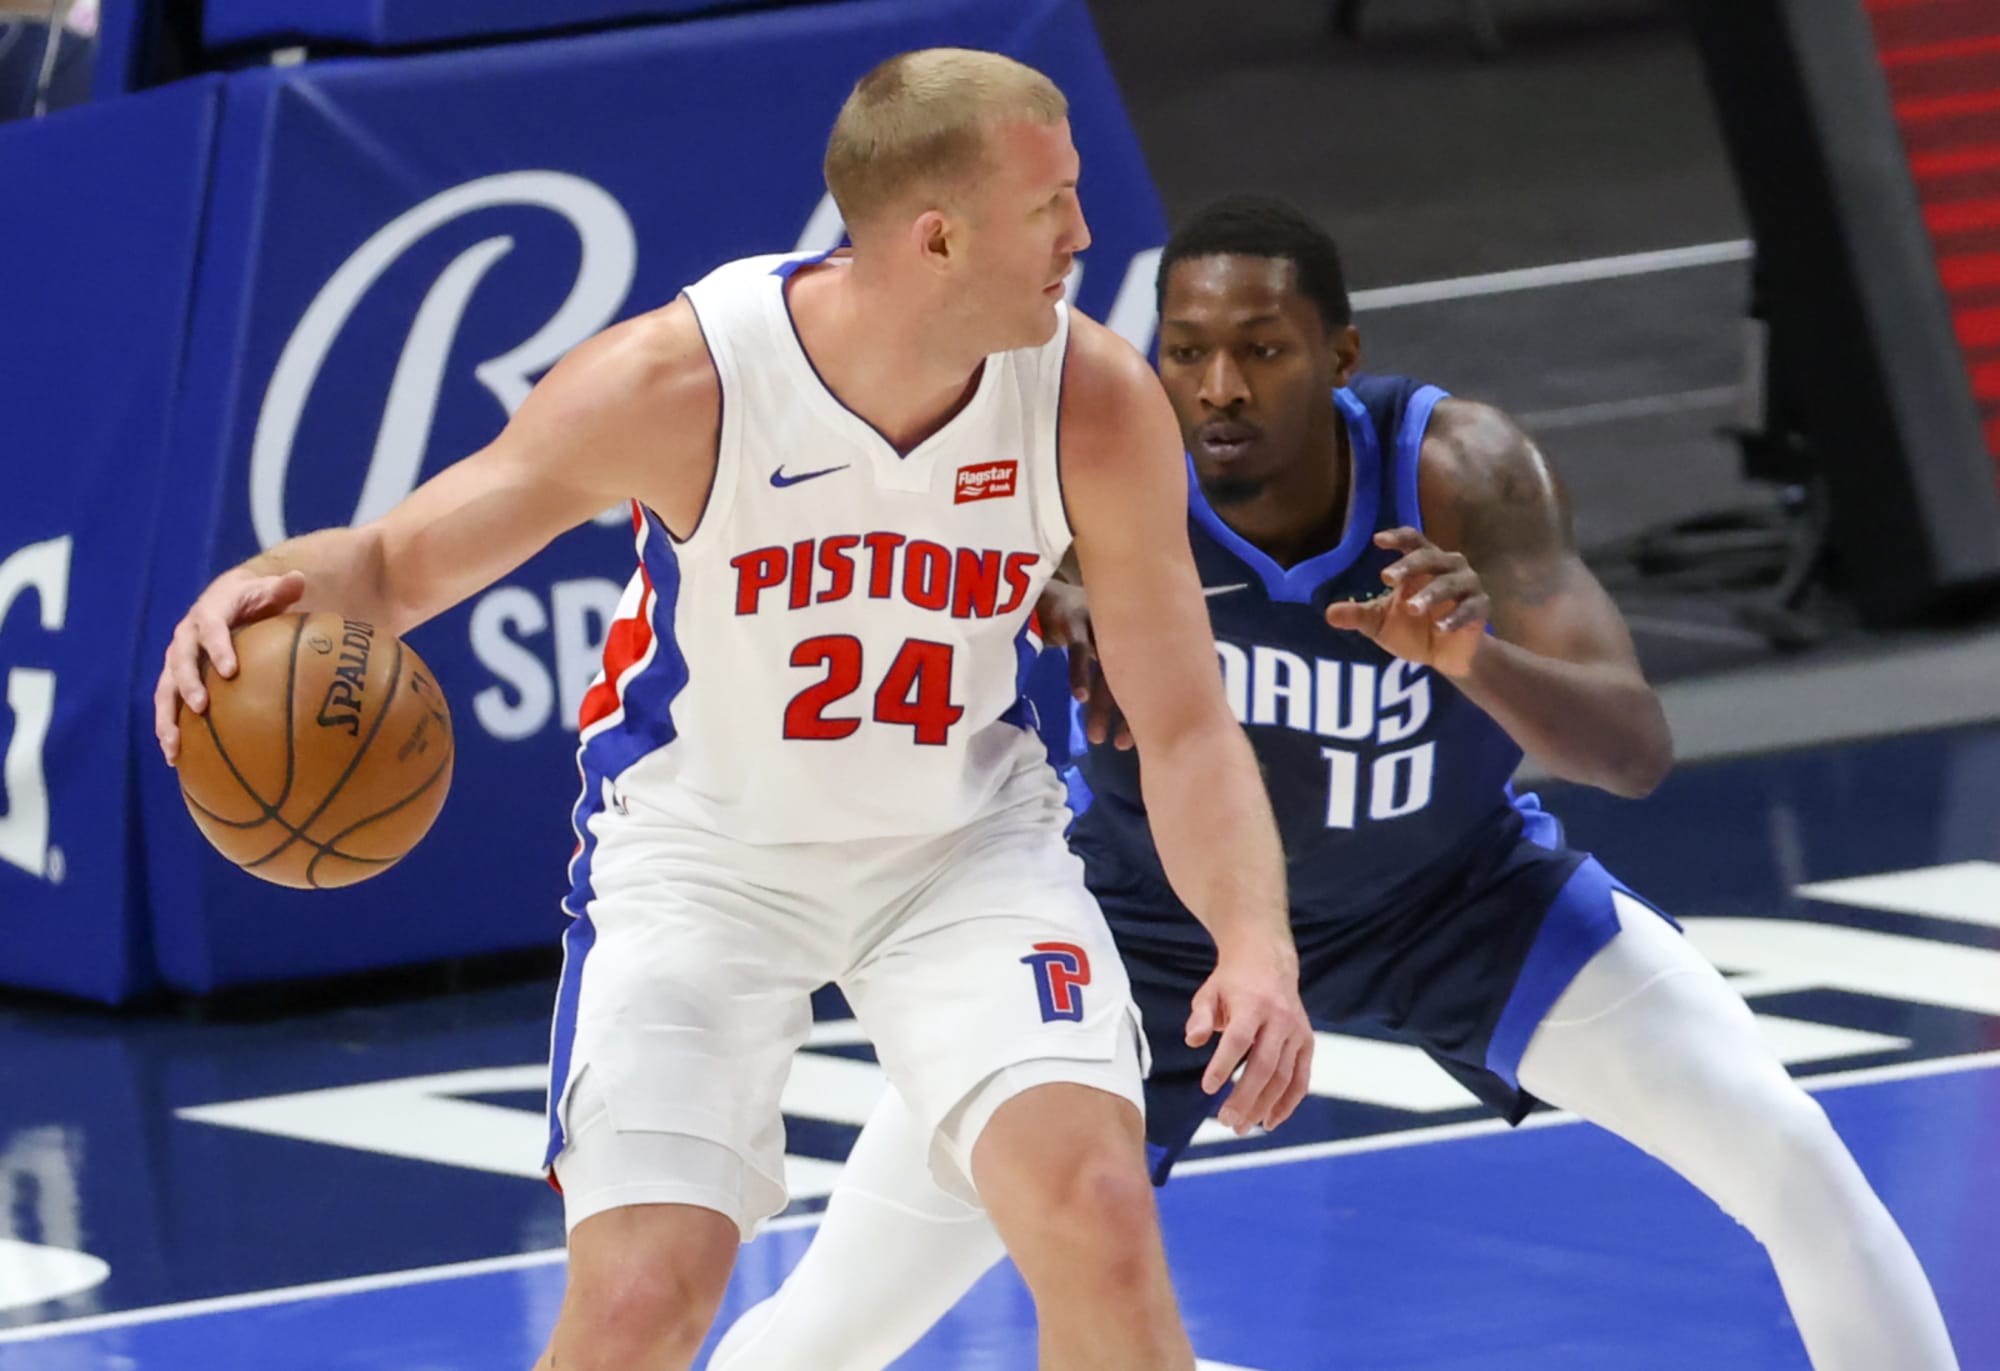 NBA free agency: Mason Plumlee returns to the Clippers on a bargain